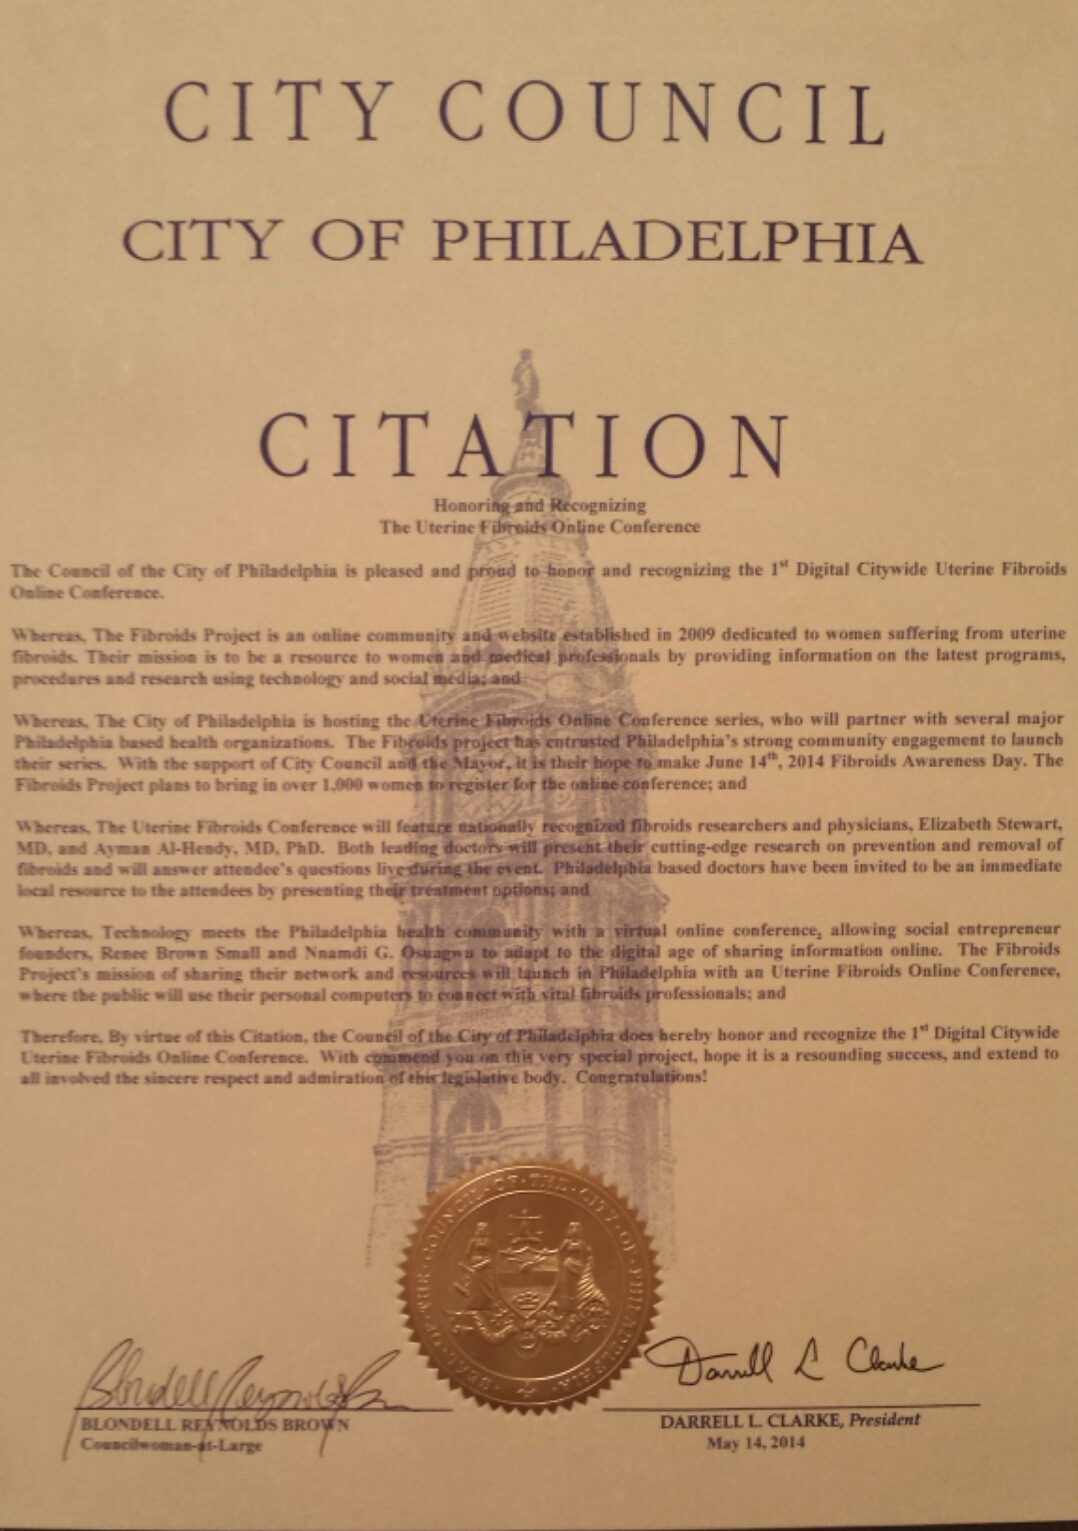 City of Philadelphia Citation Honoring and Recognizing The Uterine Fibroids Online Conference